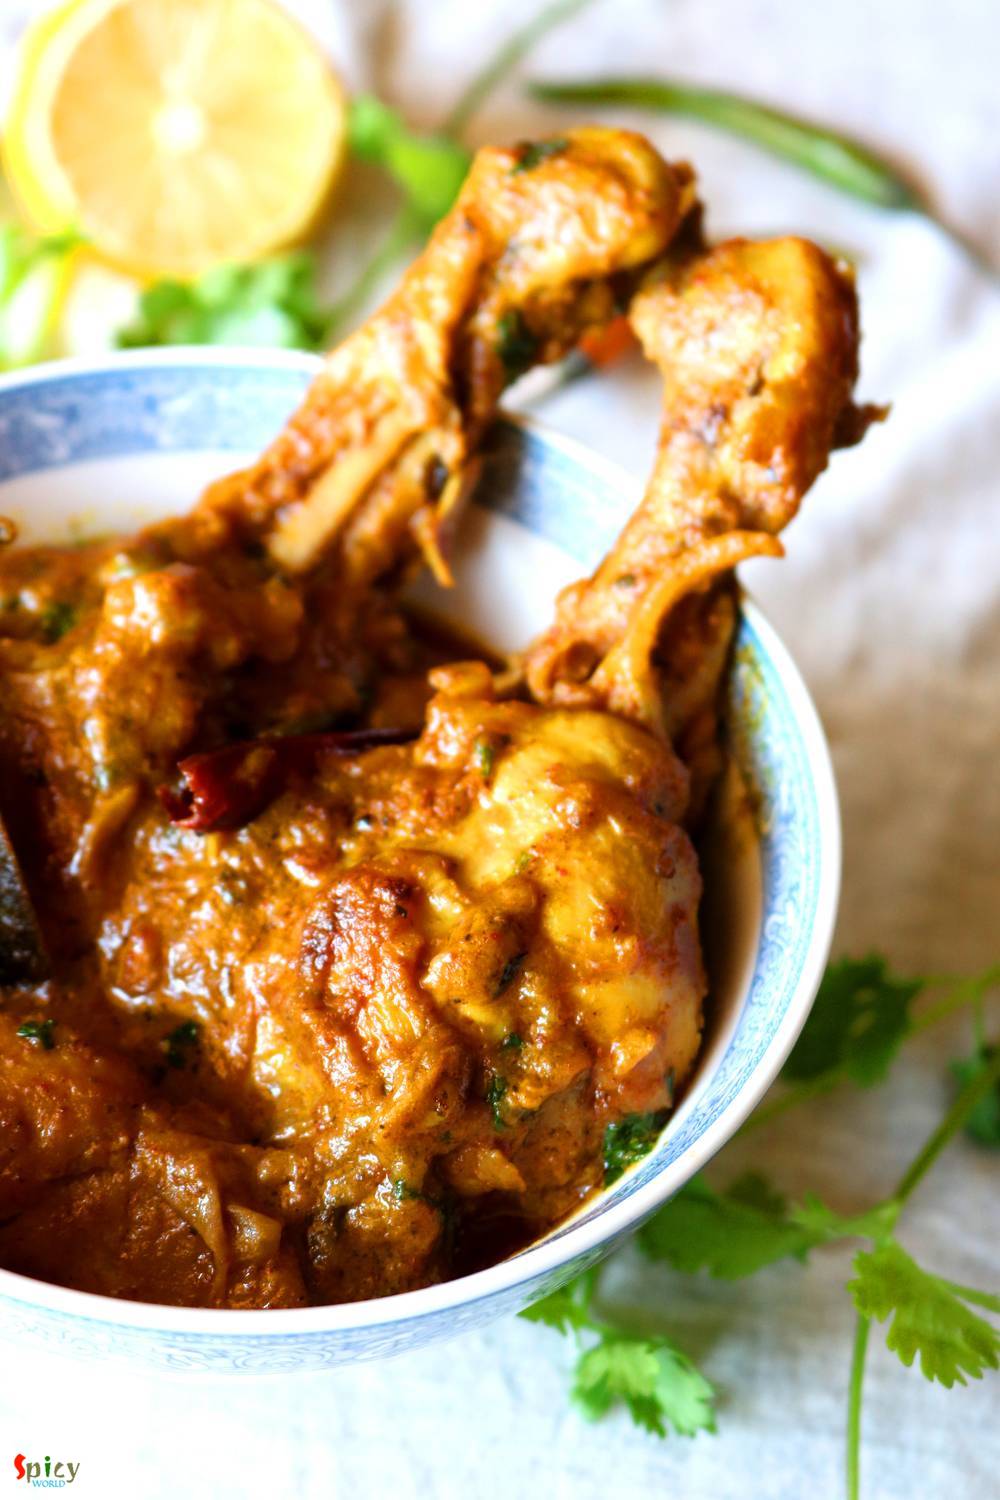 Dhaba style Chicken Curry - Spicy World Simple and Easy Recipes by Arpita